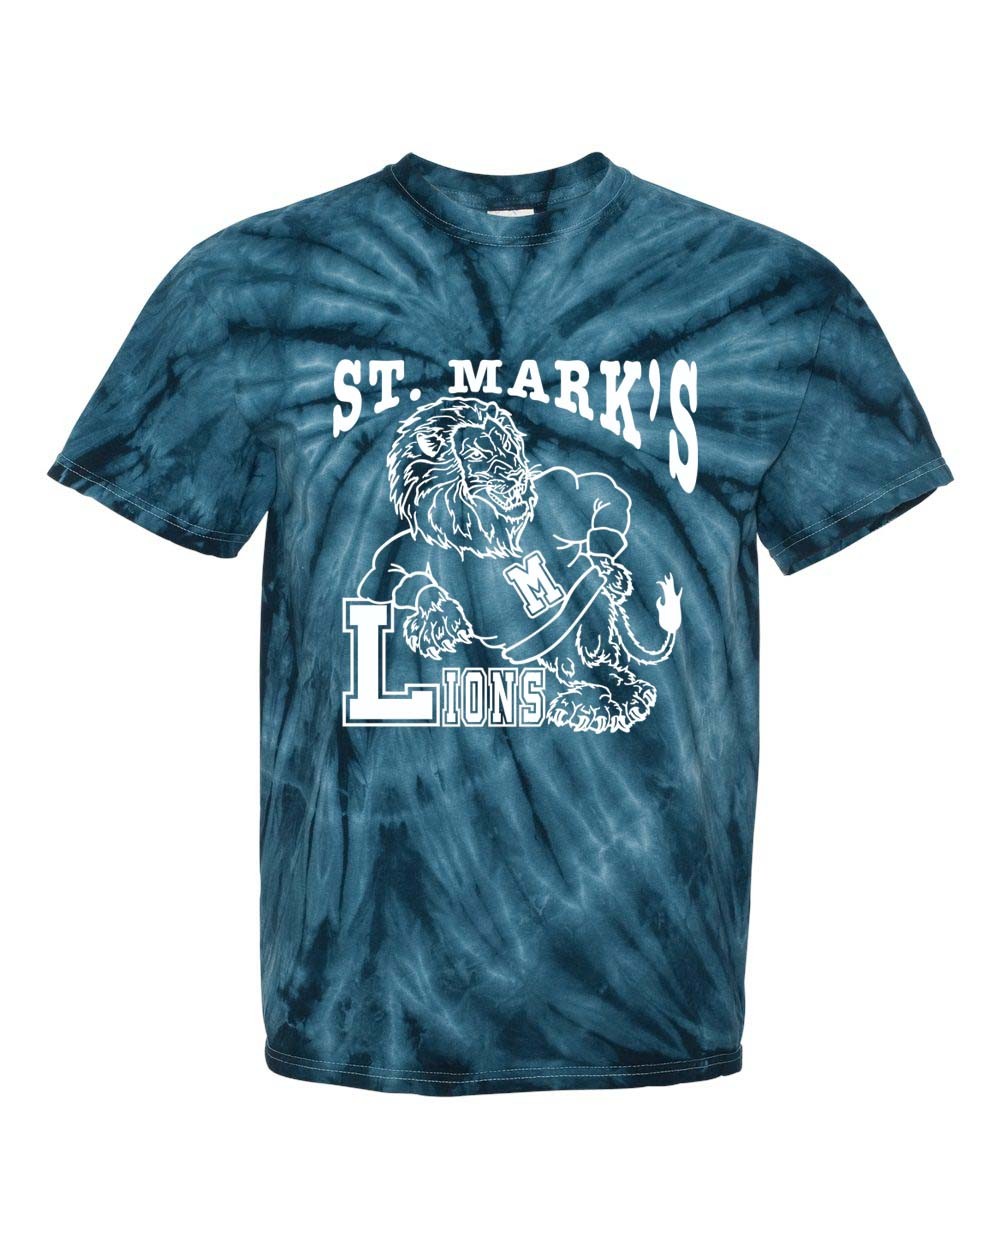 SMLS Spirit S/S Tie Dye T-Shirt w/ White Logo - Please Allow 2-3 Weeks for Delivery